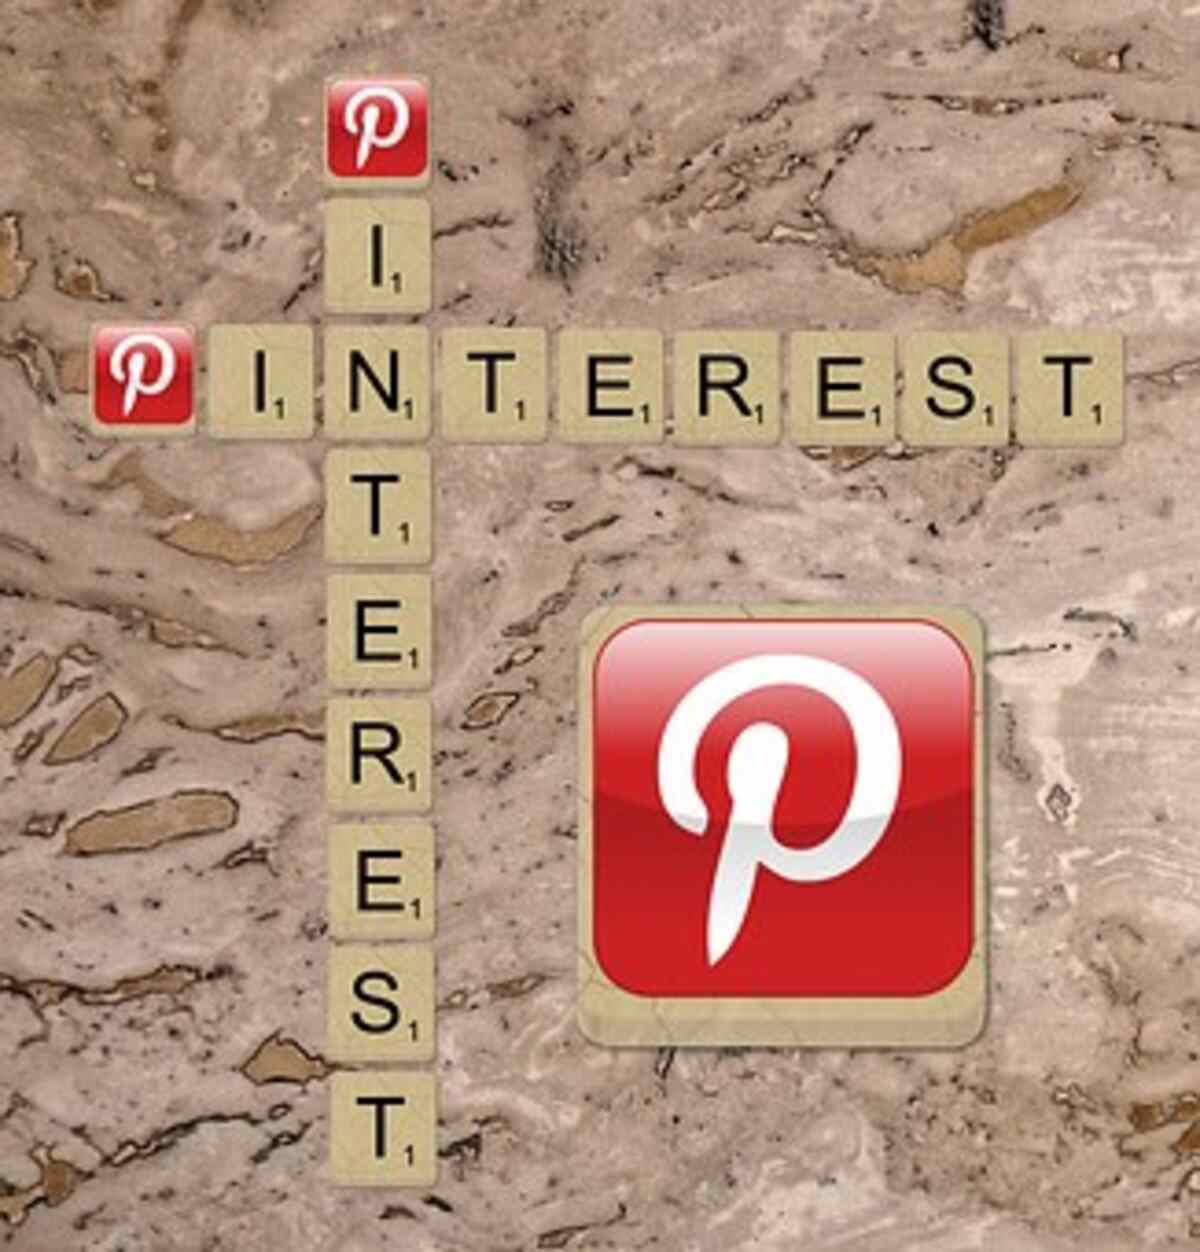 How to Get More Followers on Pinterest